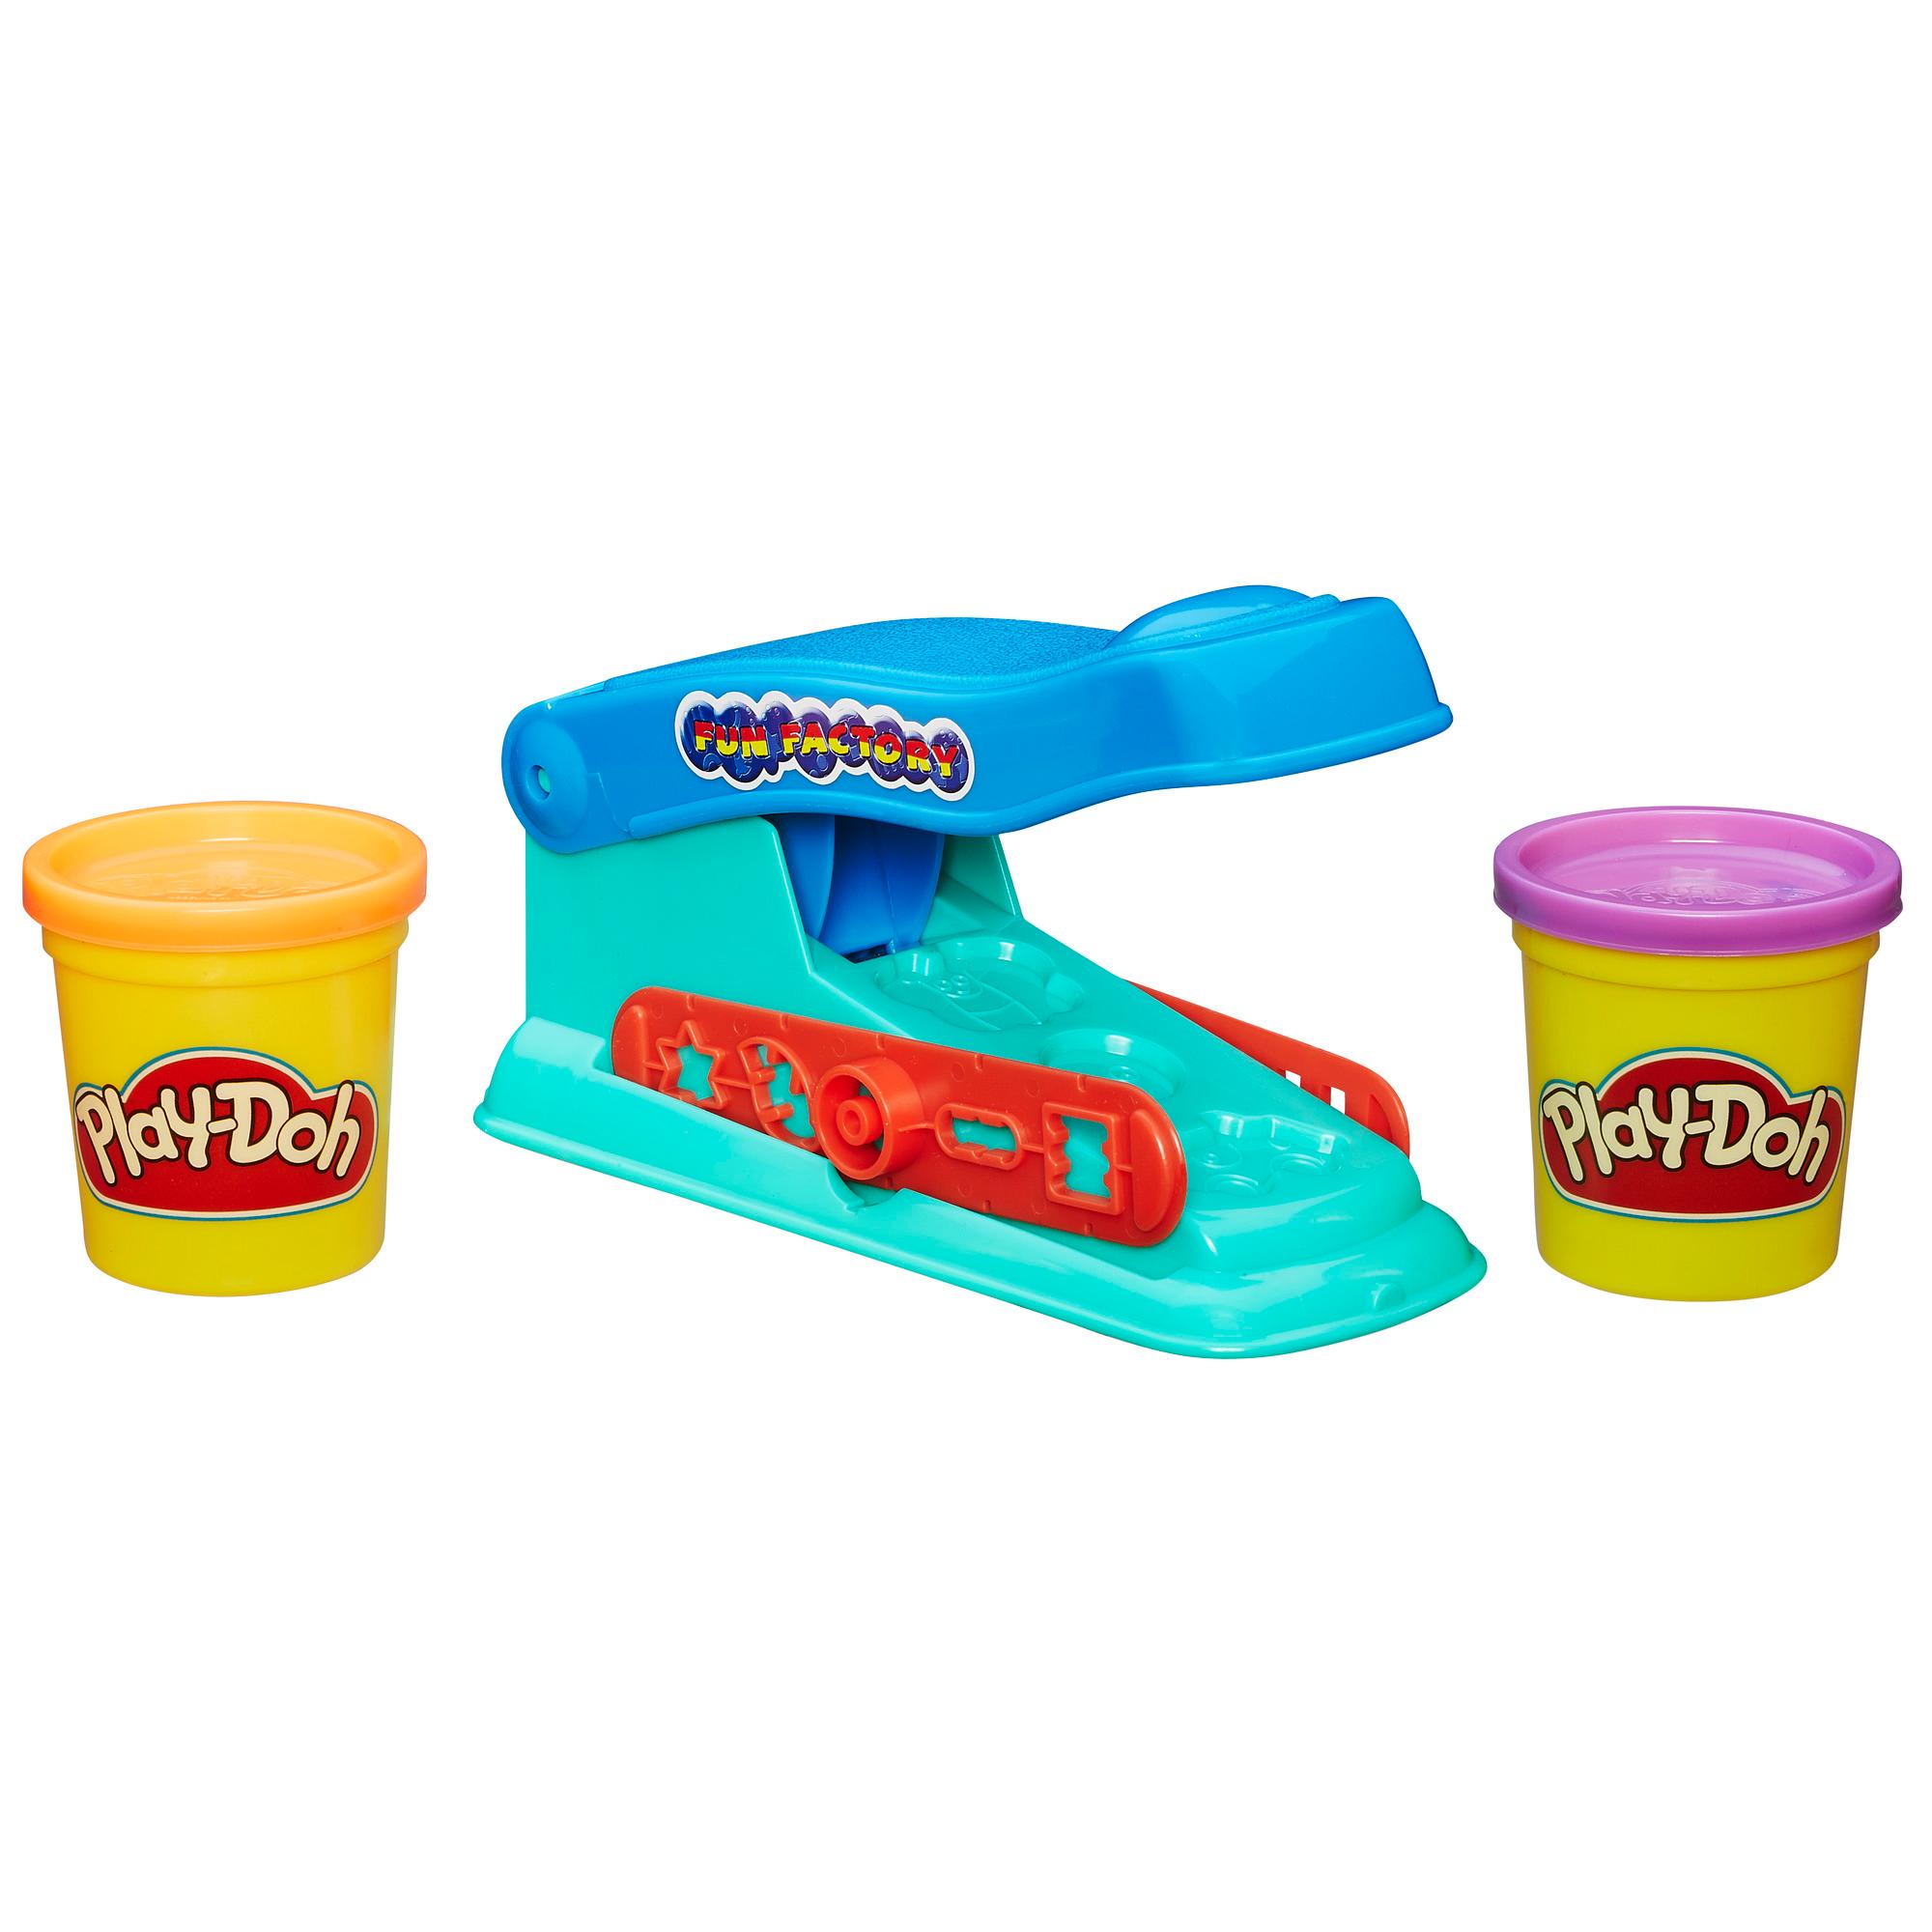 Play-Doh Fun Factory Set, Includes 2 Cans of Play-Doh - image 1 of 2